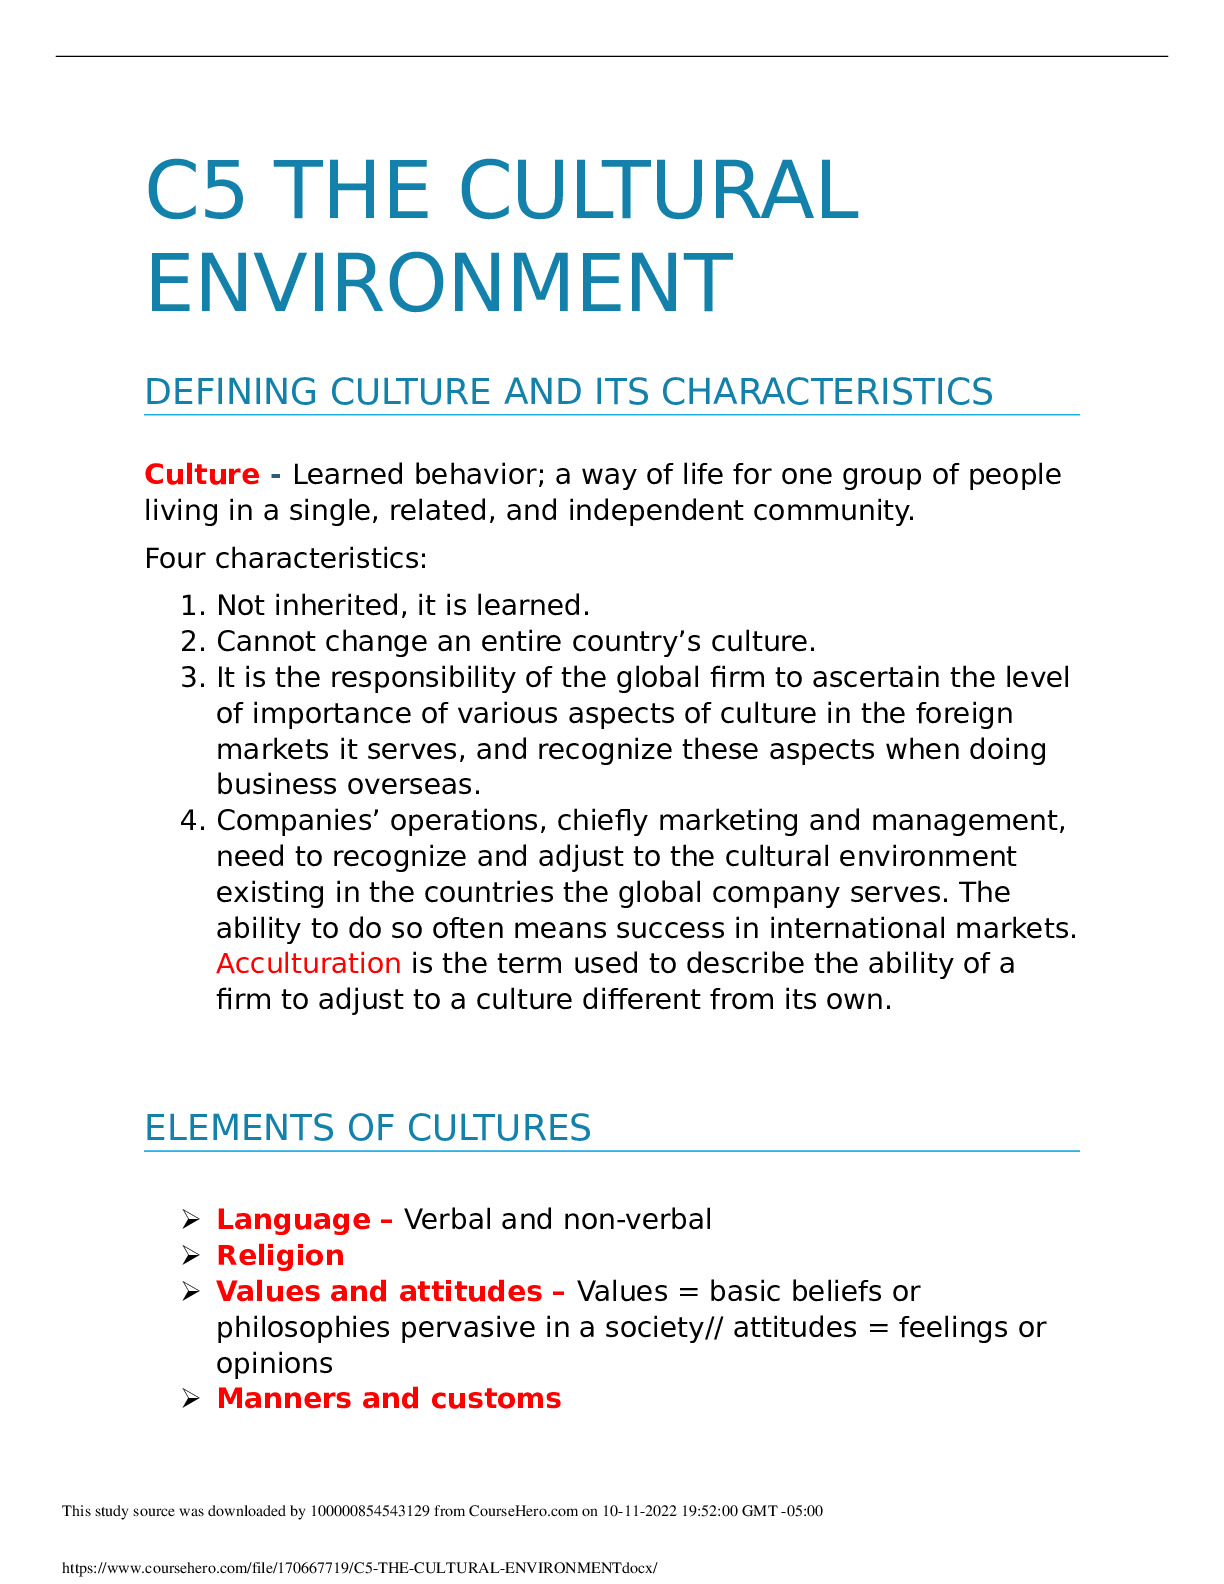 C5_THE_CULTURAL_ENVIRONMENT.docx